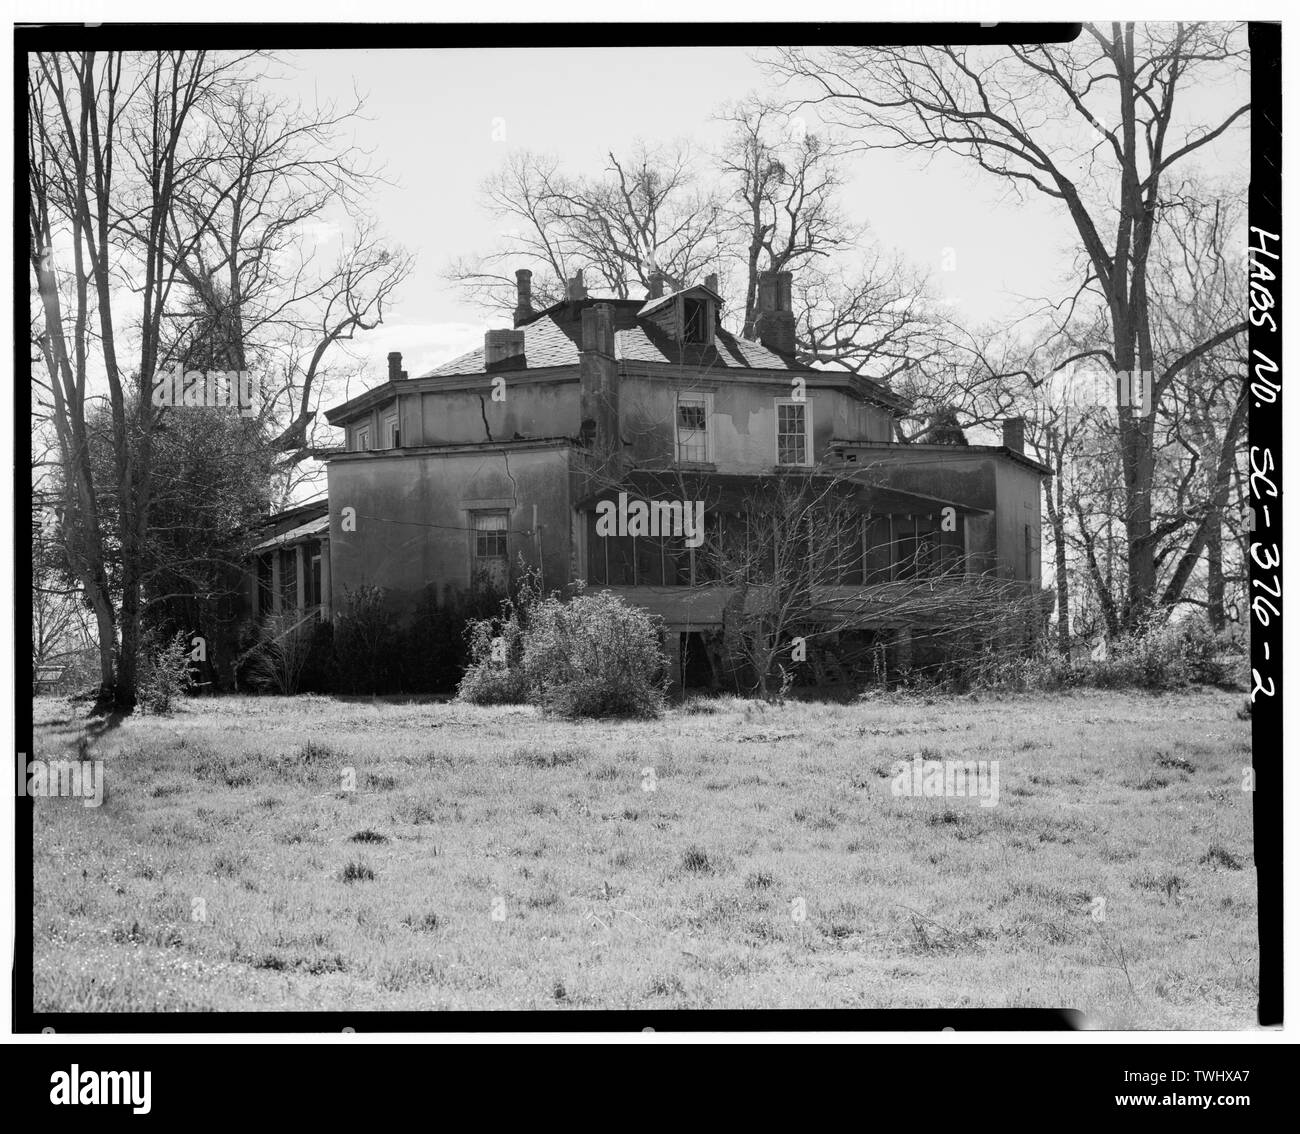 SIDE ELEVATION, LOOKING WEST - Zelotes Holmes House, 619 East Main Street, Laurens, Laurens County, SC; Holmes, Zelotes; Cary, Brian, transmitter Stock Photo